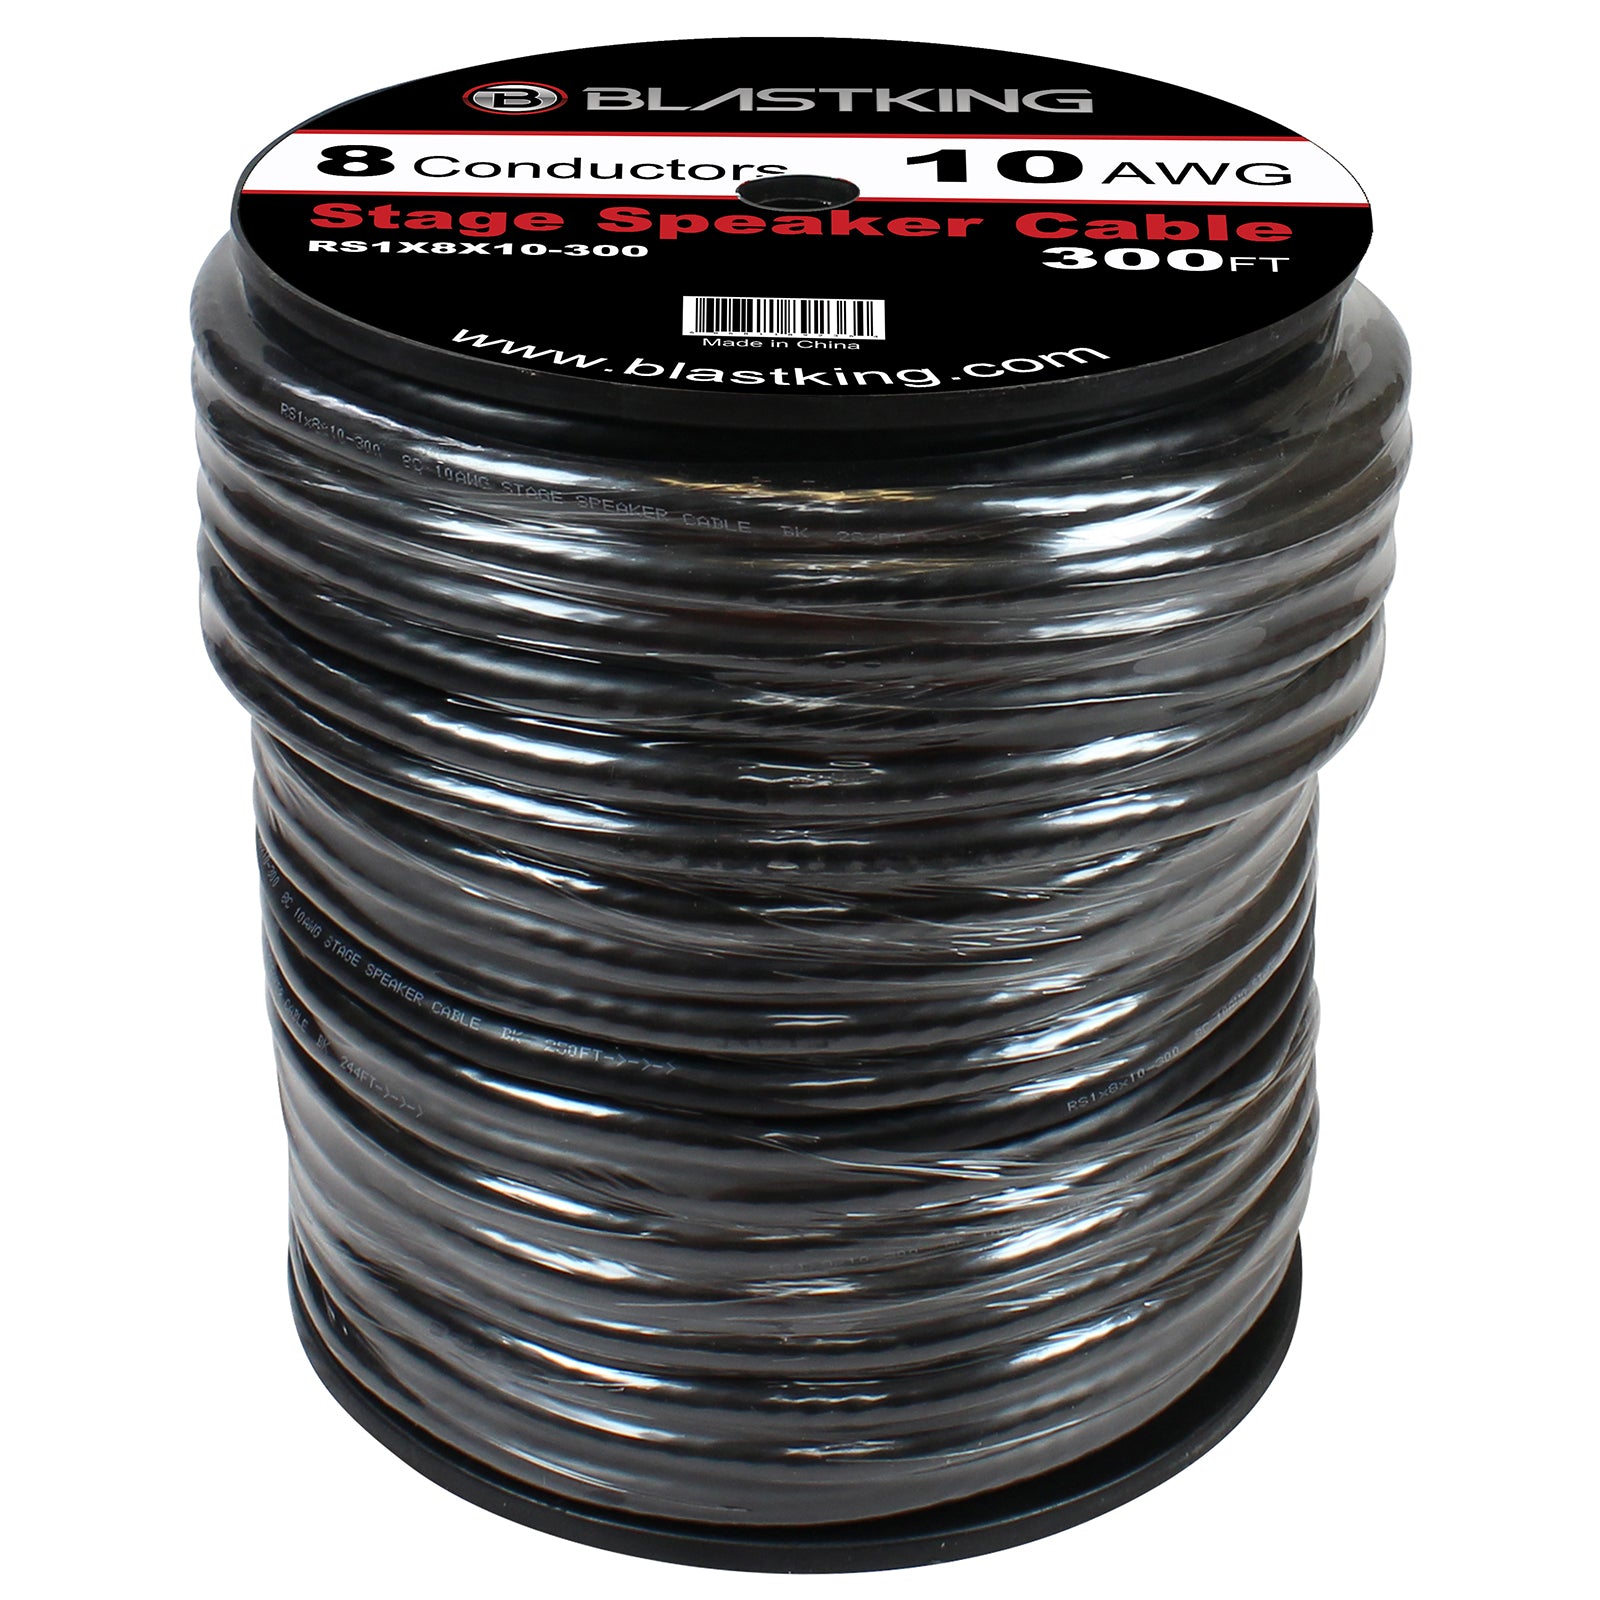 Blastking RS1X8x10-300 10 AWG 8-Conductor Speaker Cable 300 Ft